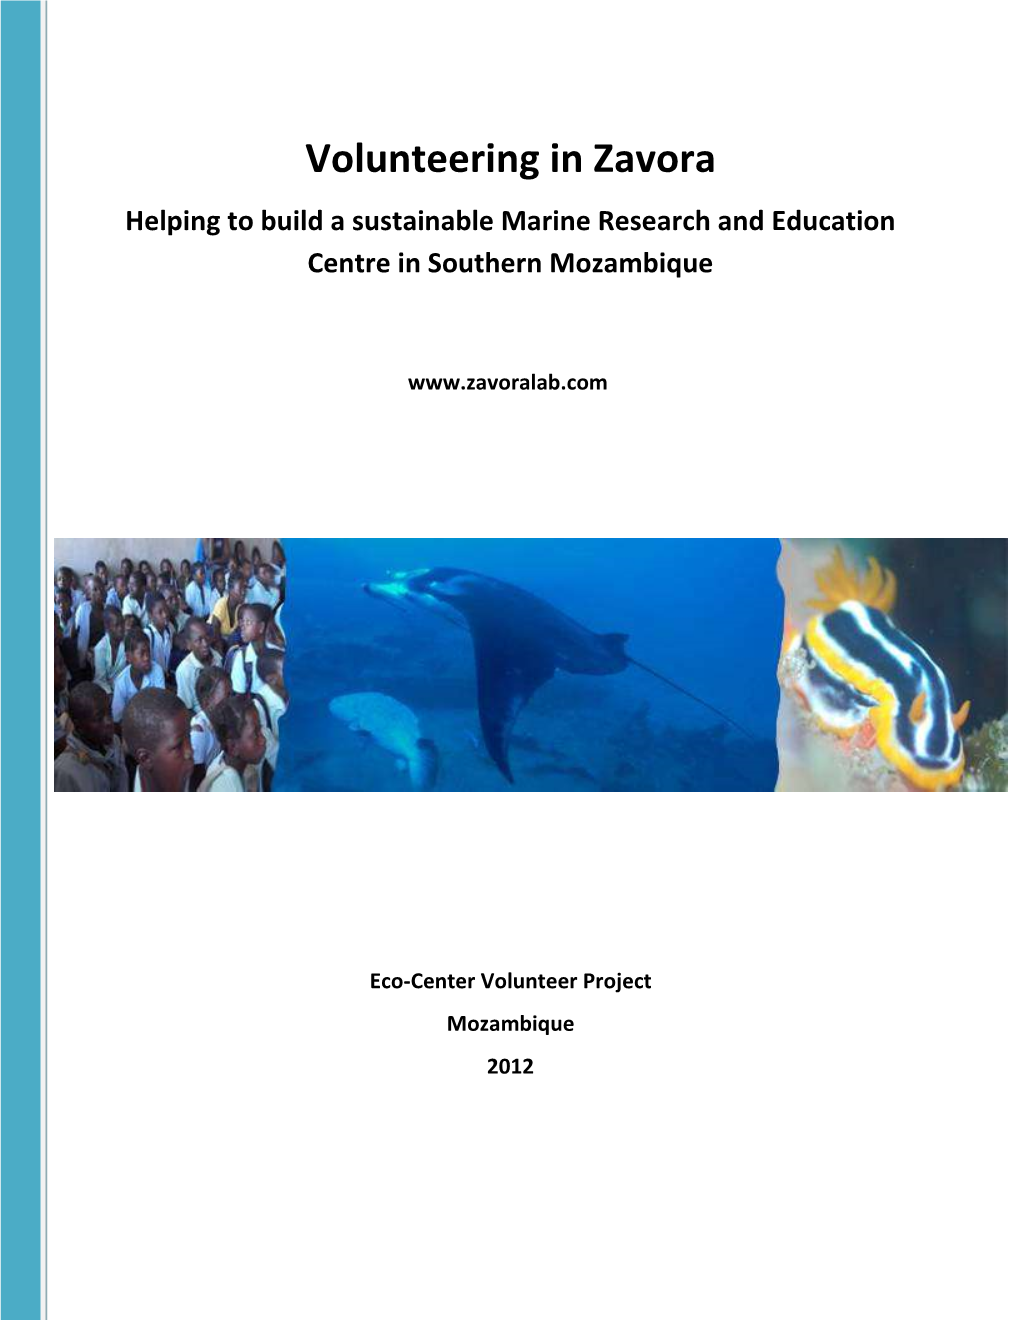 Volunteering in Zavora Helping to Build a Sustainable Marine Research and Education Centre in Southern Mozambique